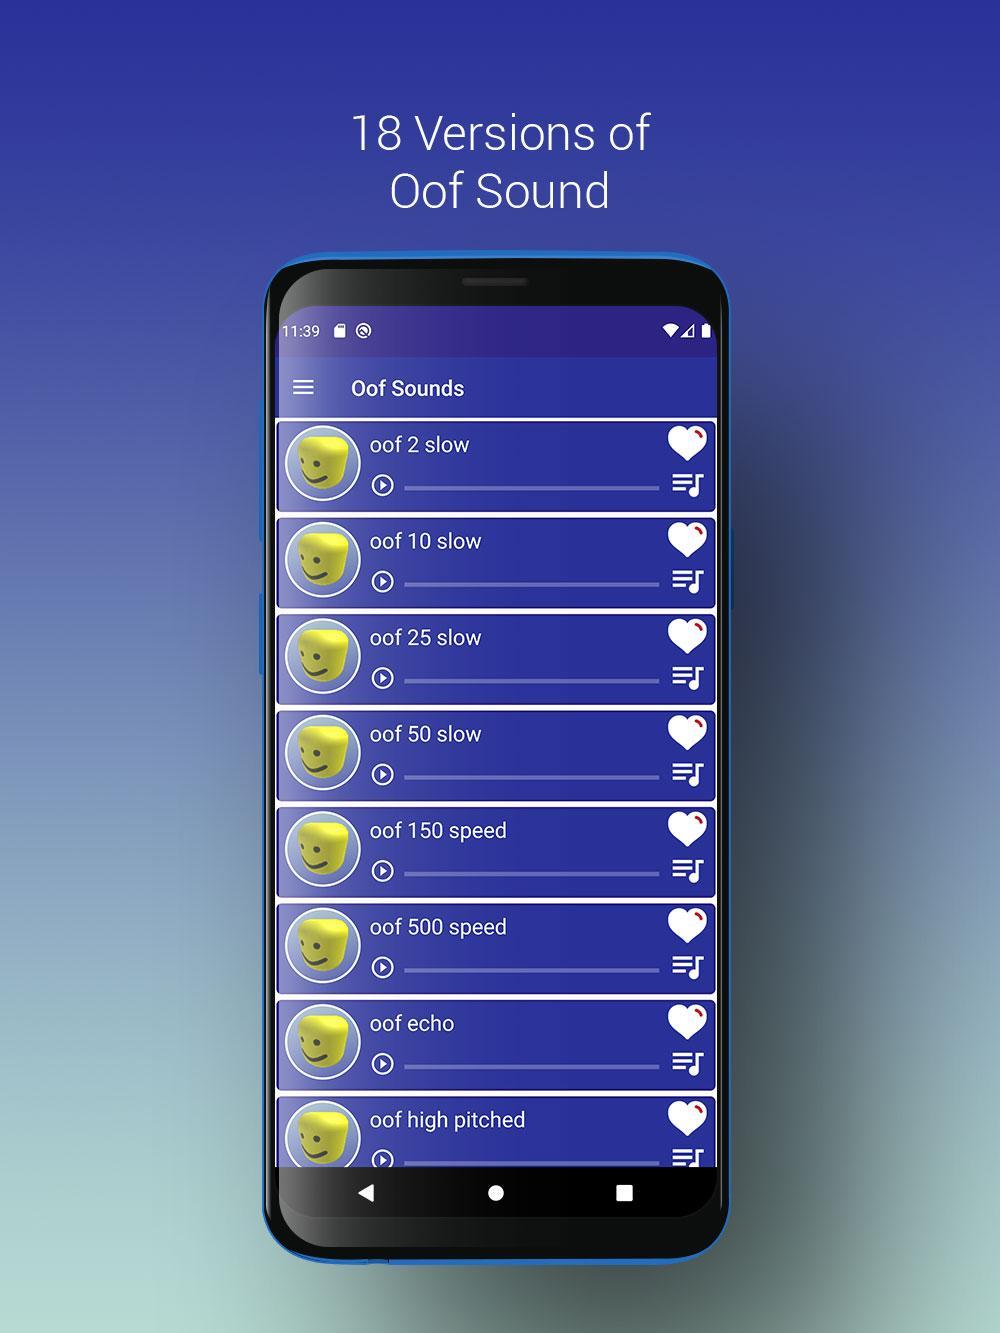 Roblox Oof Soundboard For Android Apk Download - oof soundboard for roblox revenue download estimates apple